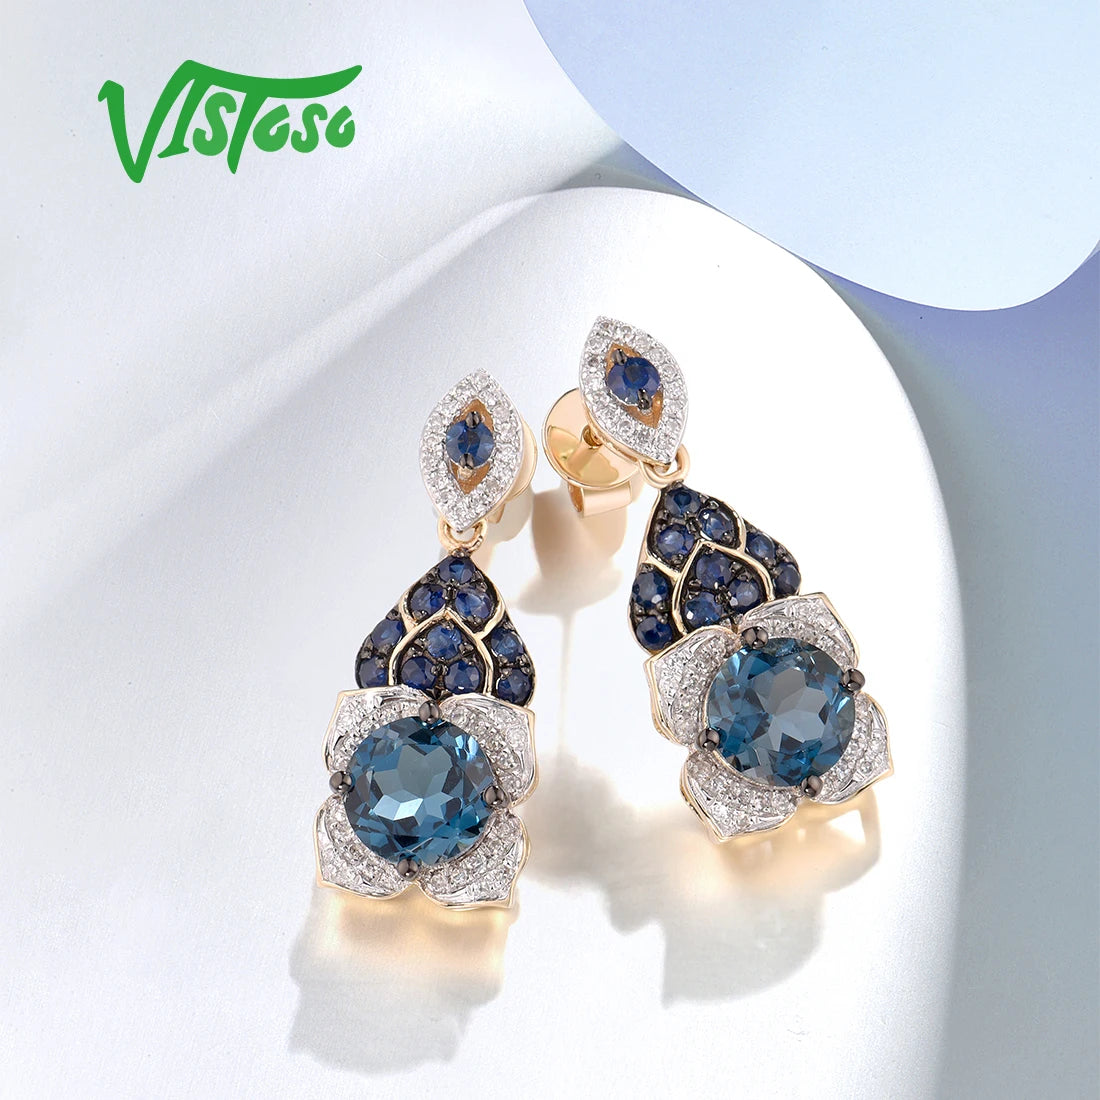 VISTOSO Gold Earrings For Women Pure 14K 585 Yellow Gold Sparkling DiaSPECIFICATIONSBrand Name: VISTOSOMetals Type: Yellow GoldMetal Stamp: 14kOrigin: Mainland ChinaMain Stone: TopazOccasion: PartyCertificate Type: GDTCSide Stone: DiamJewelry CirclesJewelry CirclesWomen Pure 14K 585 Yellow Gold Sparkling Diamond London Blue Topaz Sapphire Drop Earrings Fine Jewelry